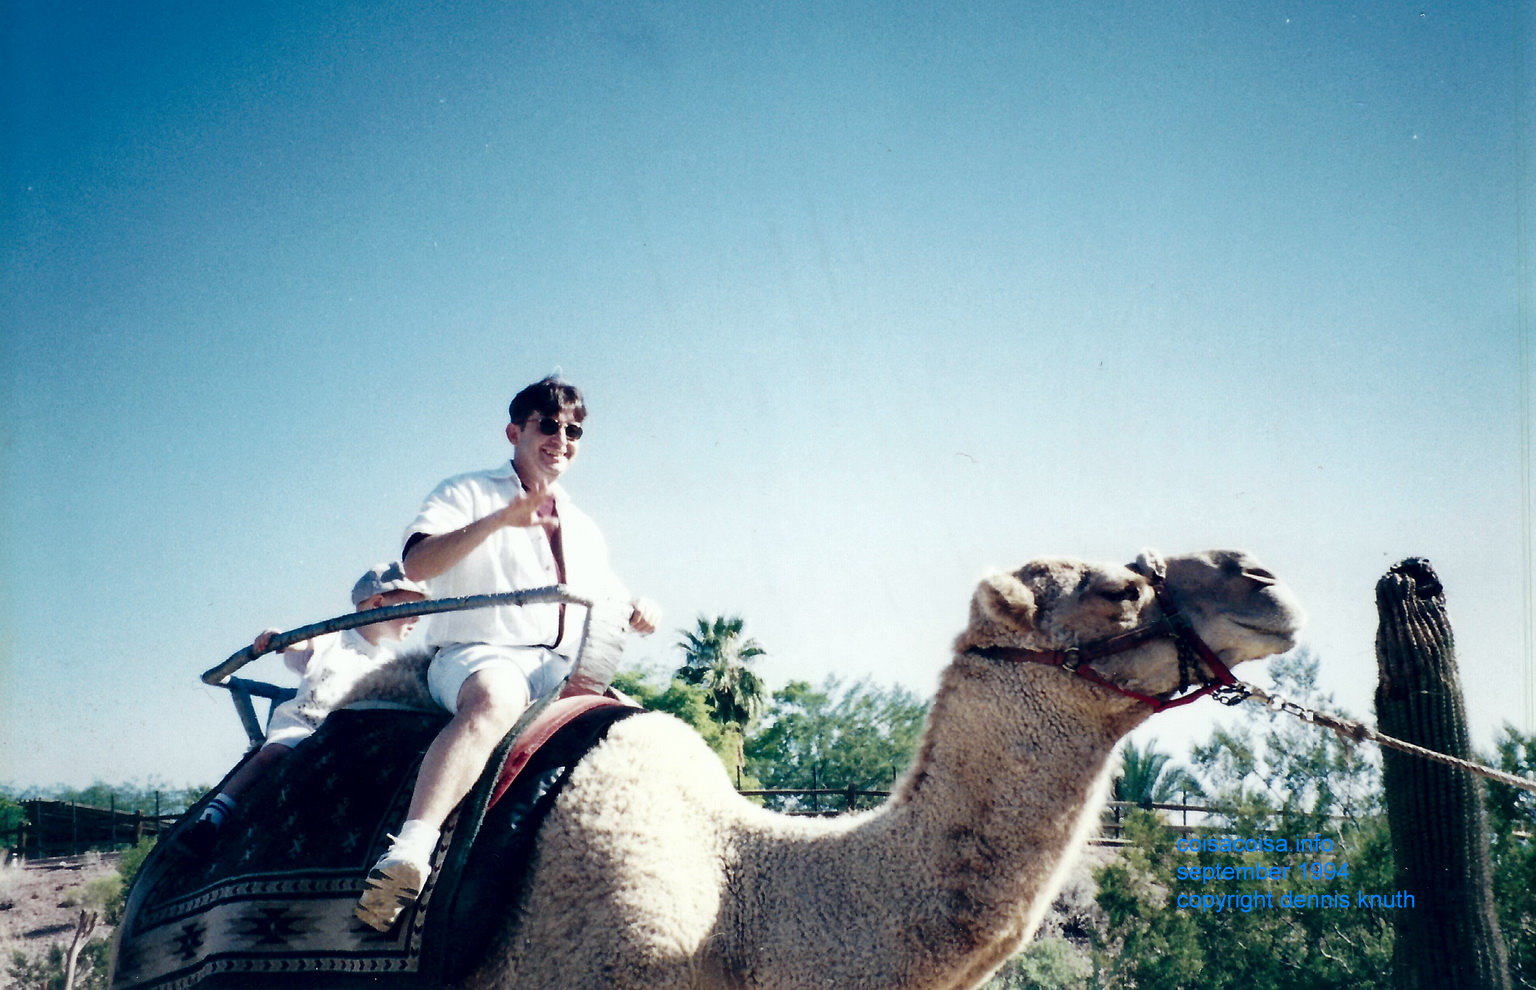 Sergio takes a ride on a camel at the Phoenix Zoo